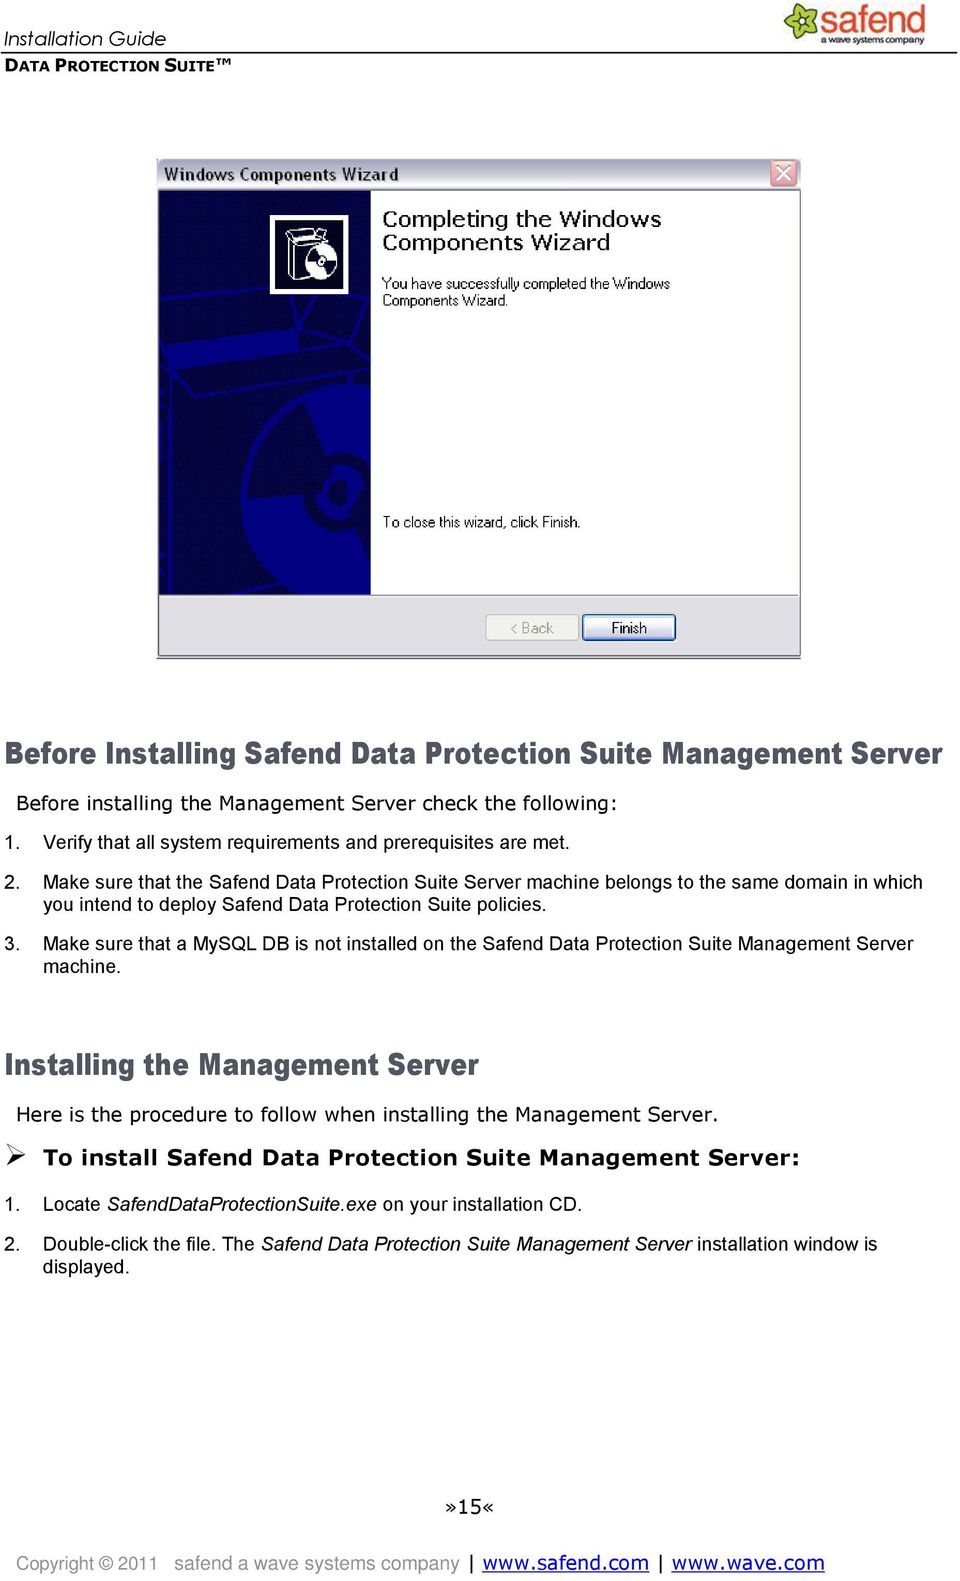 Make sure that a MySQL DB is not installed on the Safend Data Protection Suite Management Server machine.